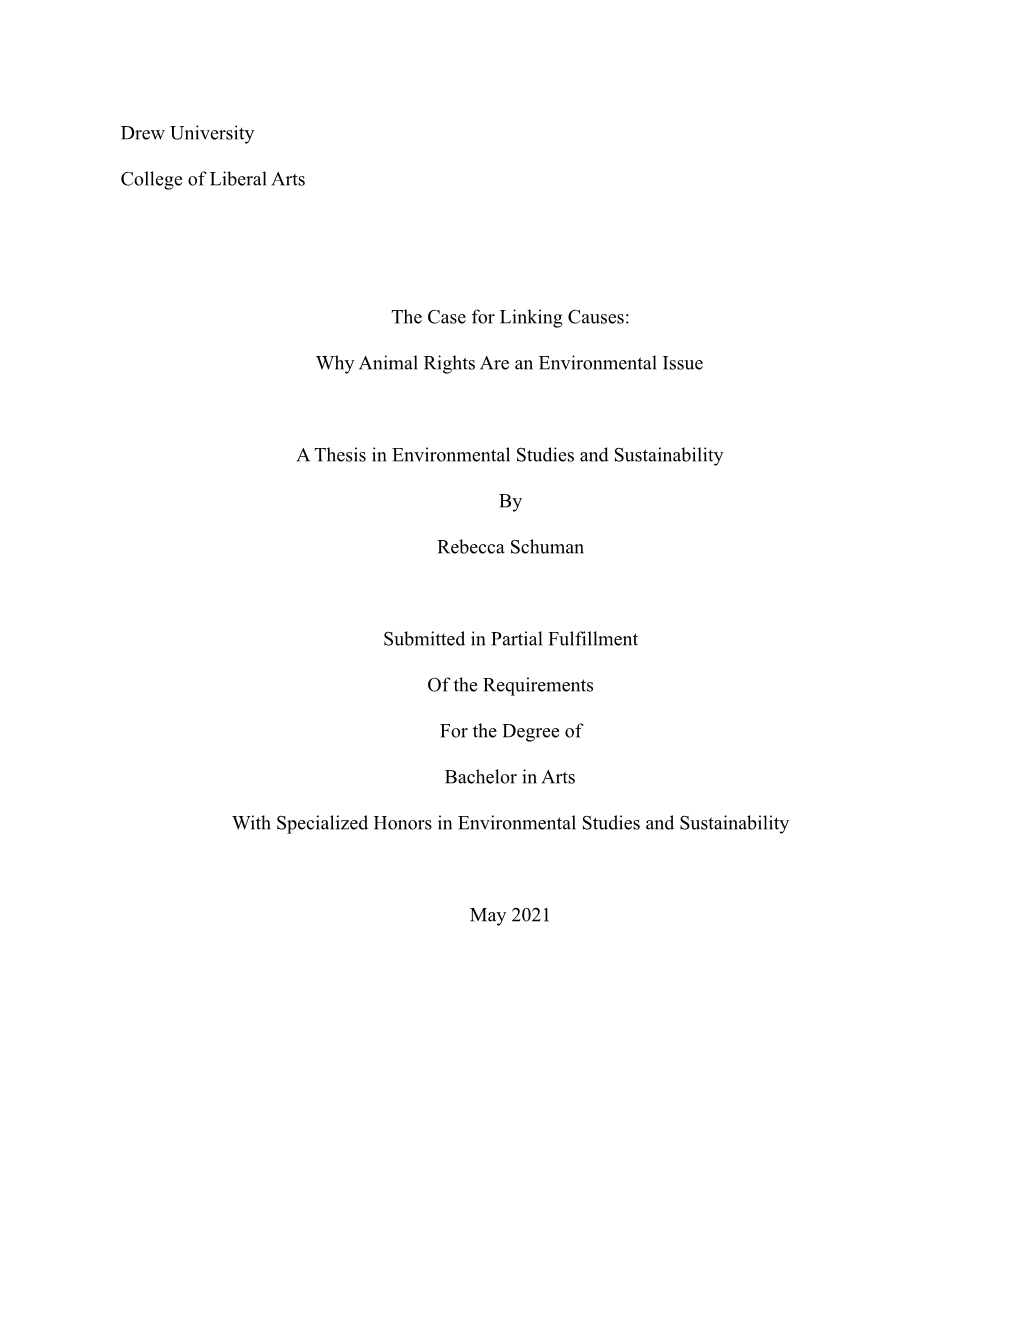 The Case for Linking Causes-Schuman-Libraryfinalthesis.Docx